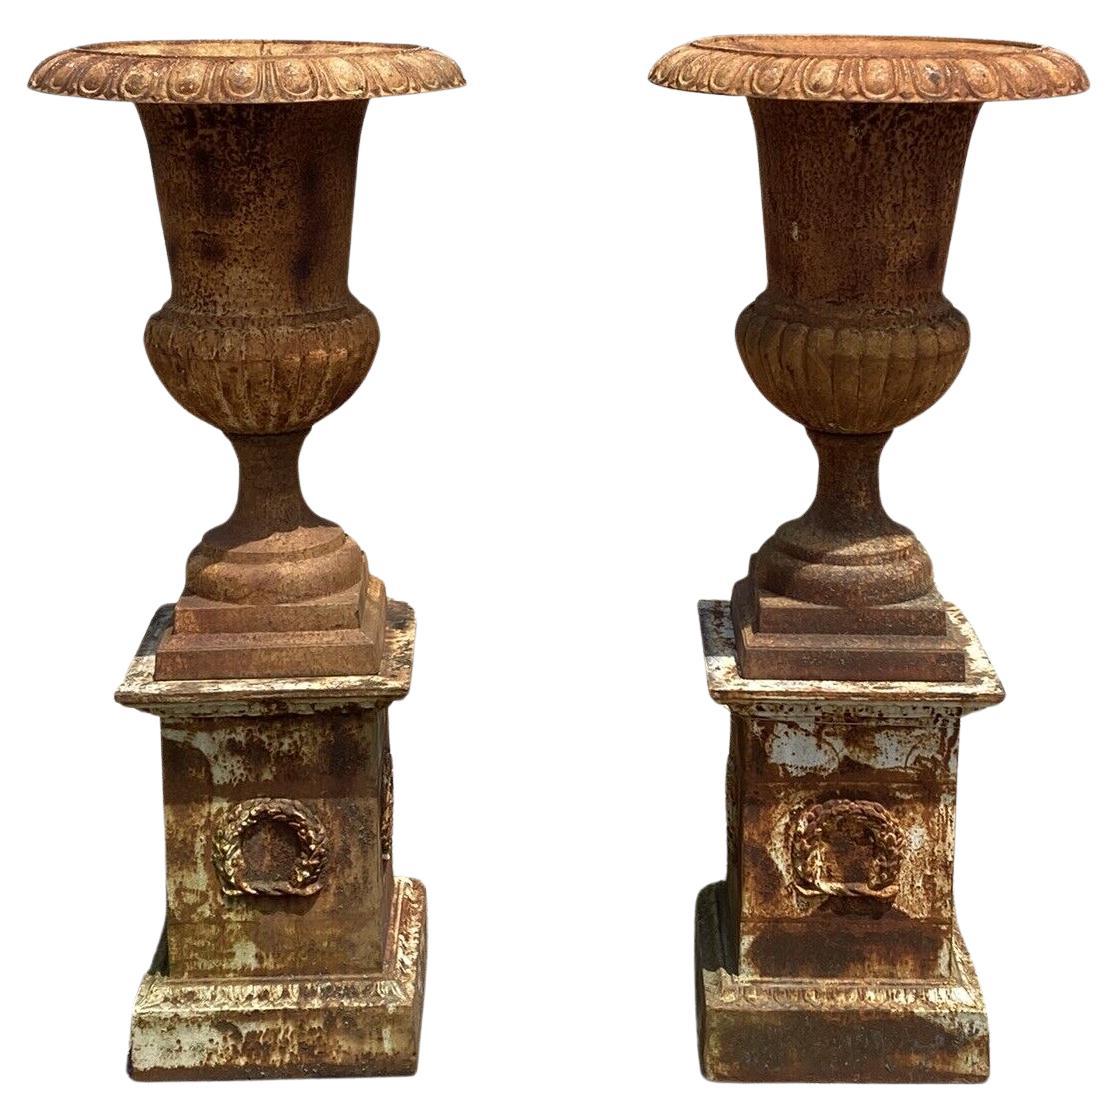 Tall Cast Iron Campana Urn Outdoor Garden Planters on Base, a Pair For Sale